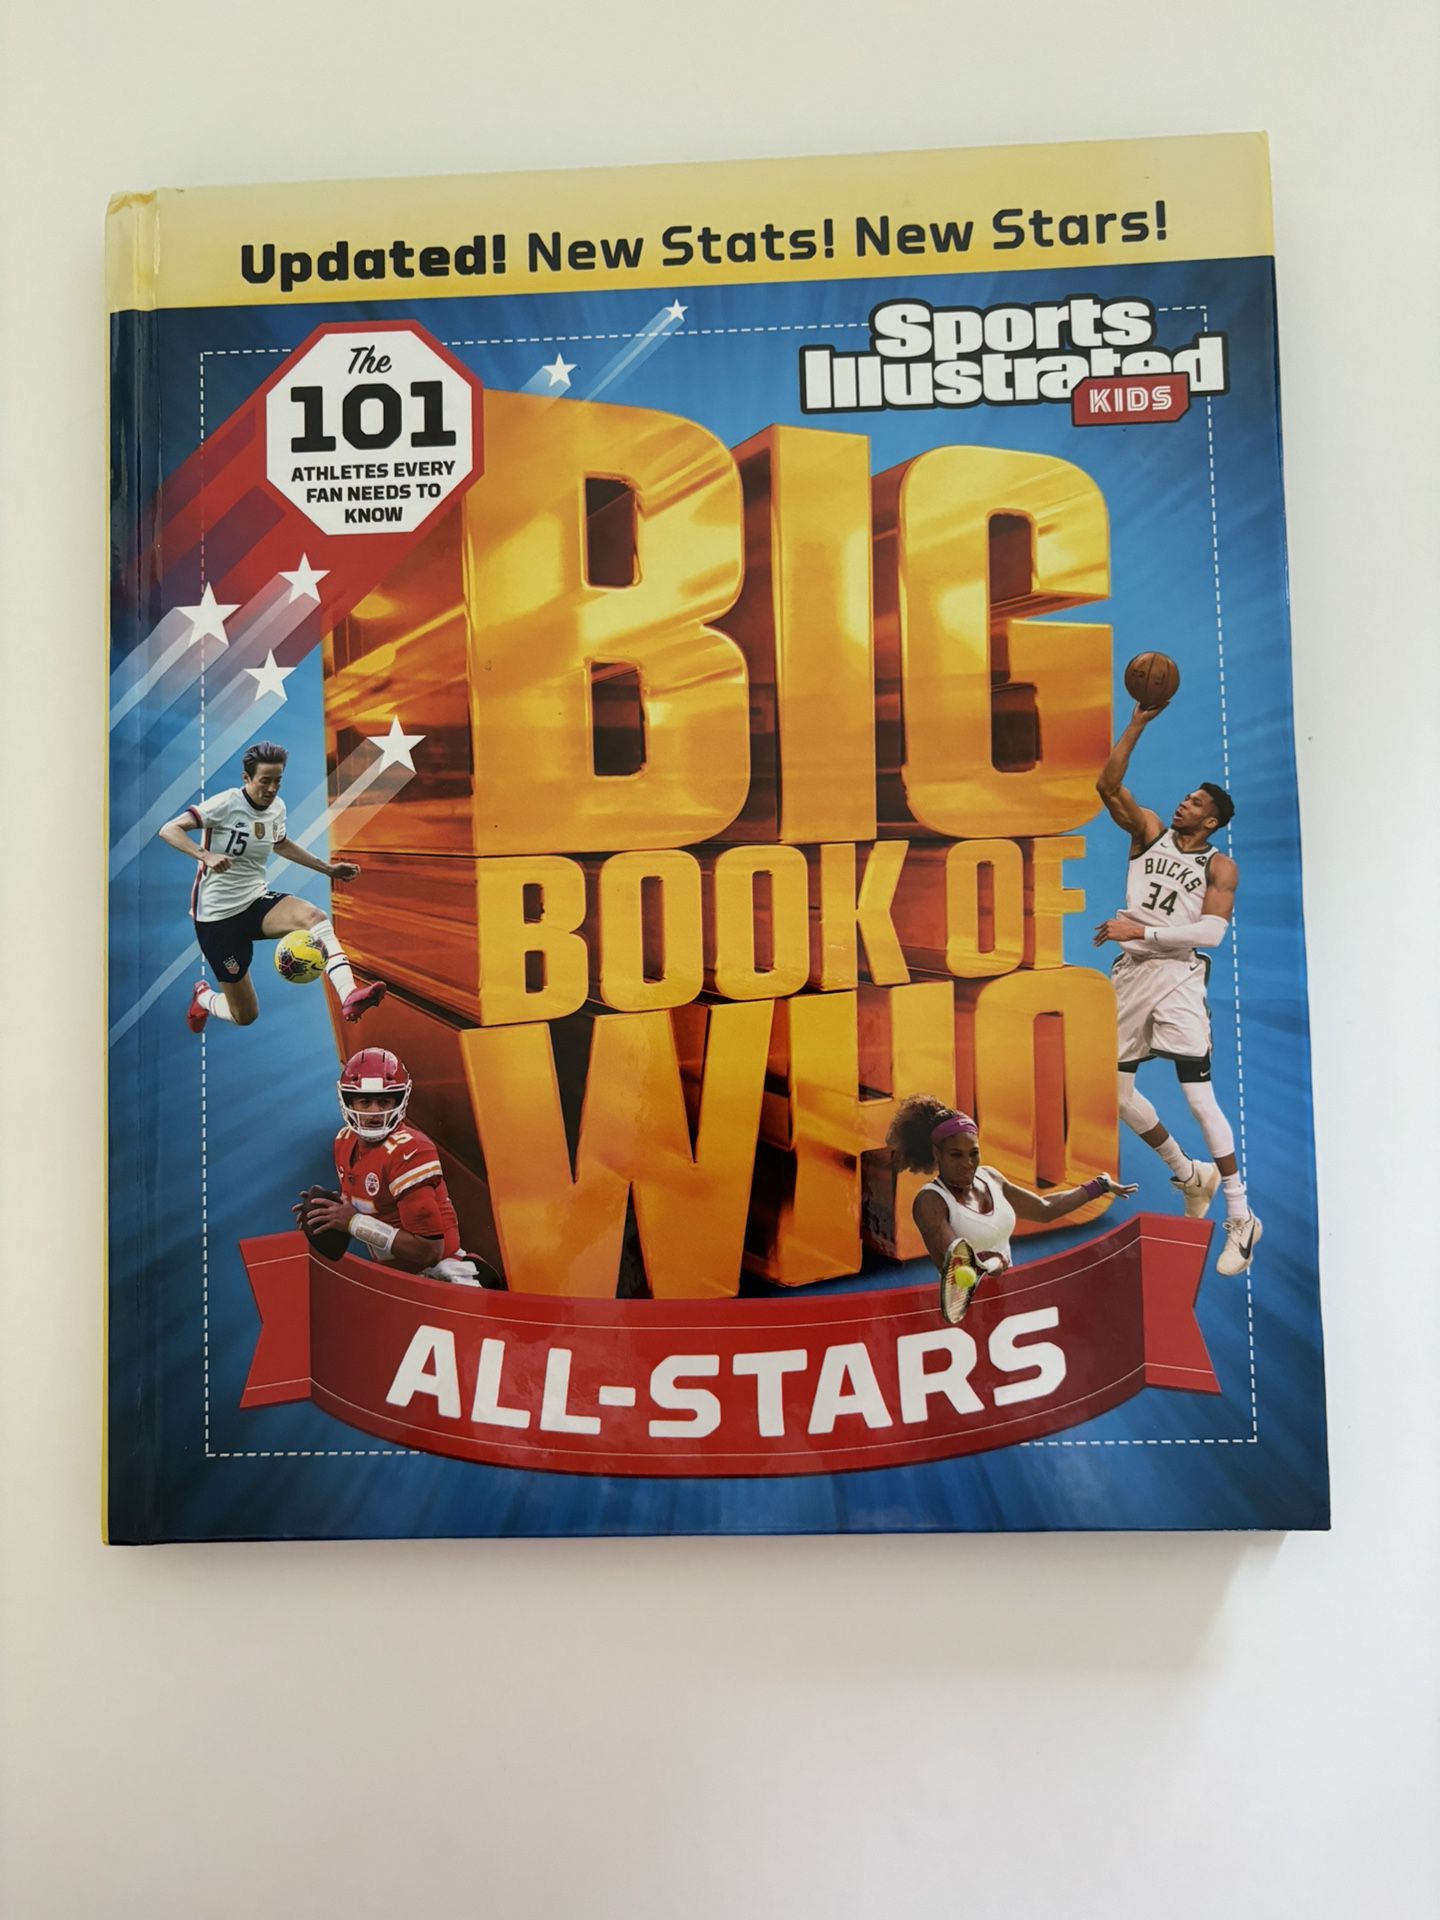 Big Book Of Who All-Stars Kids Illustrated